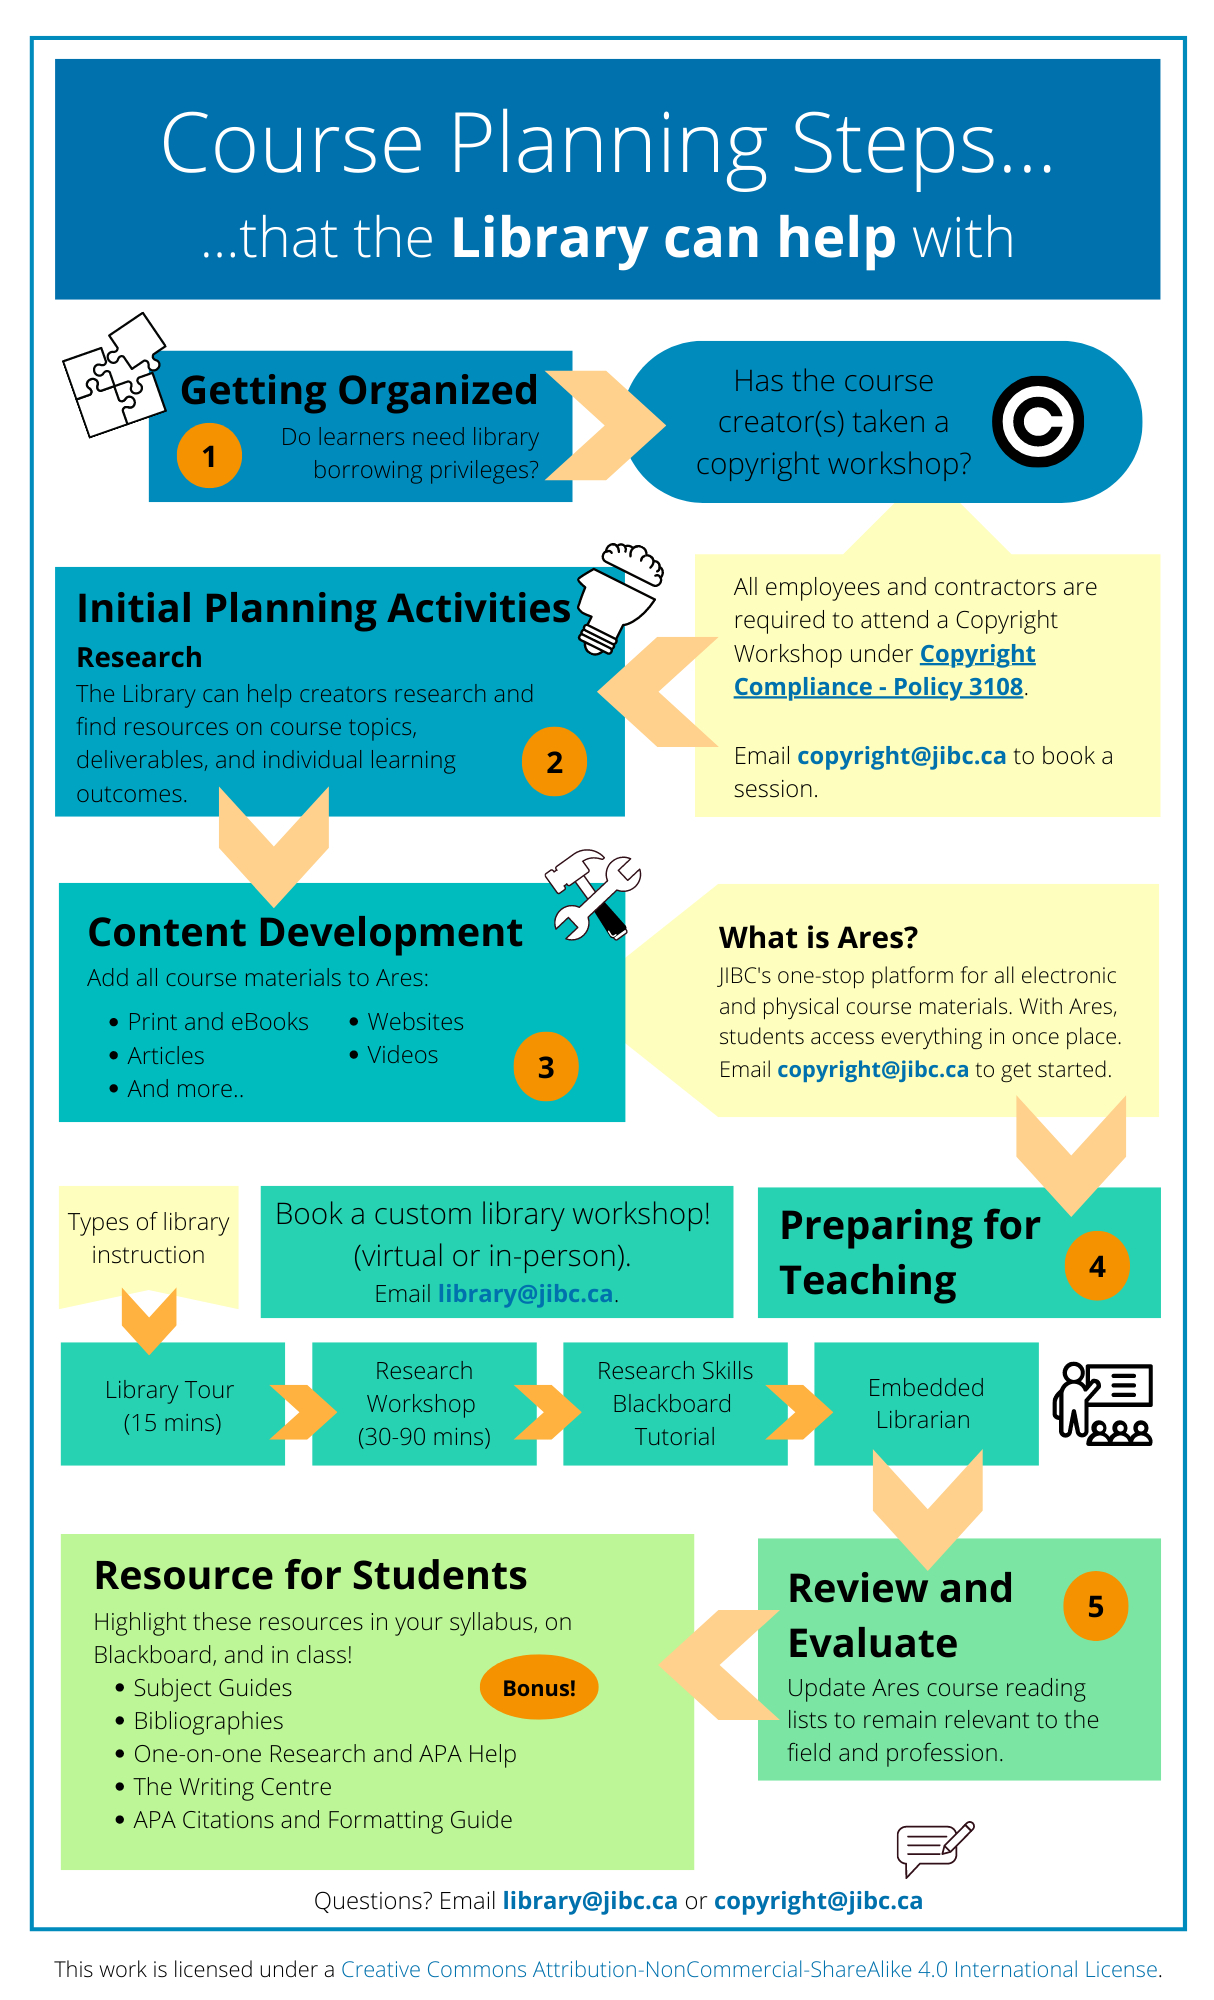 Infographic of the course planning process focused on the JIBC Library's involvement